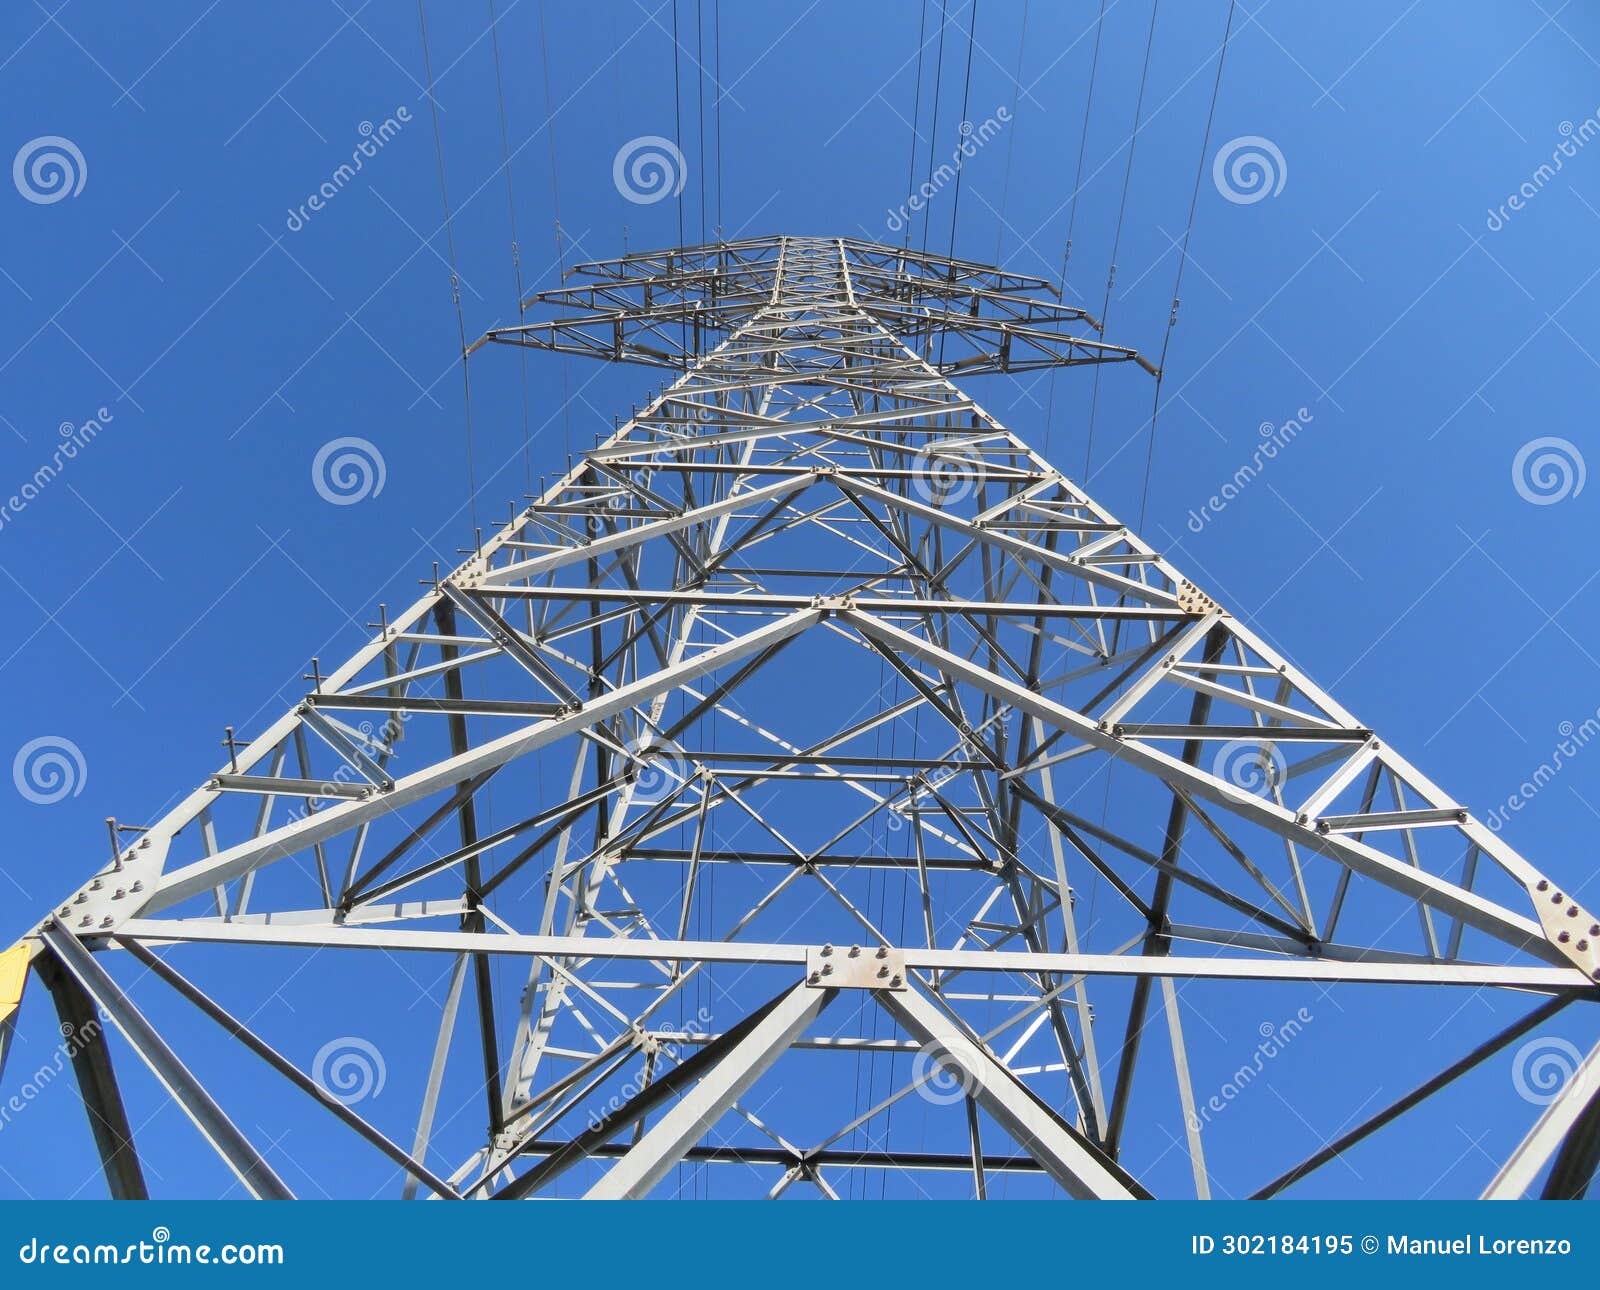 energy electricity metal towers ecology invisible industry